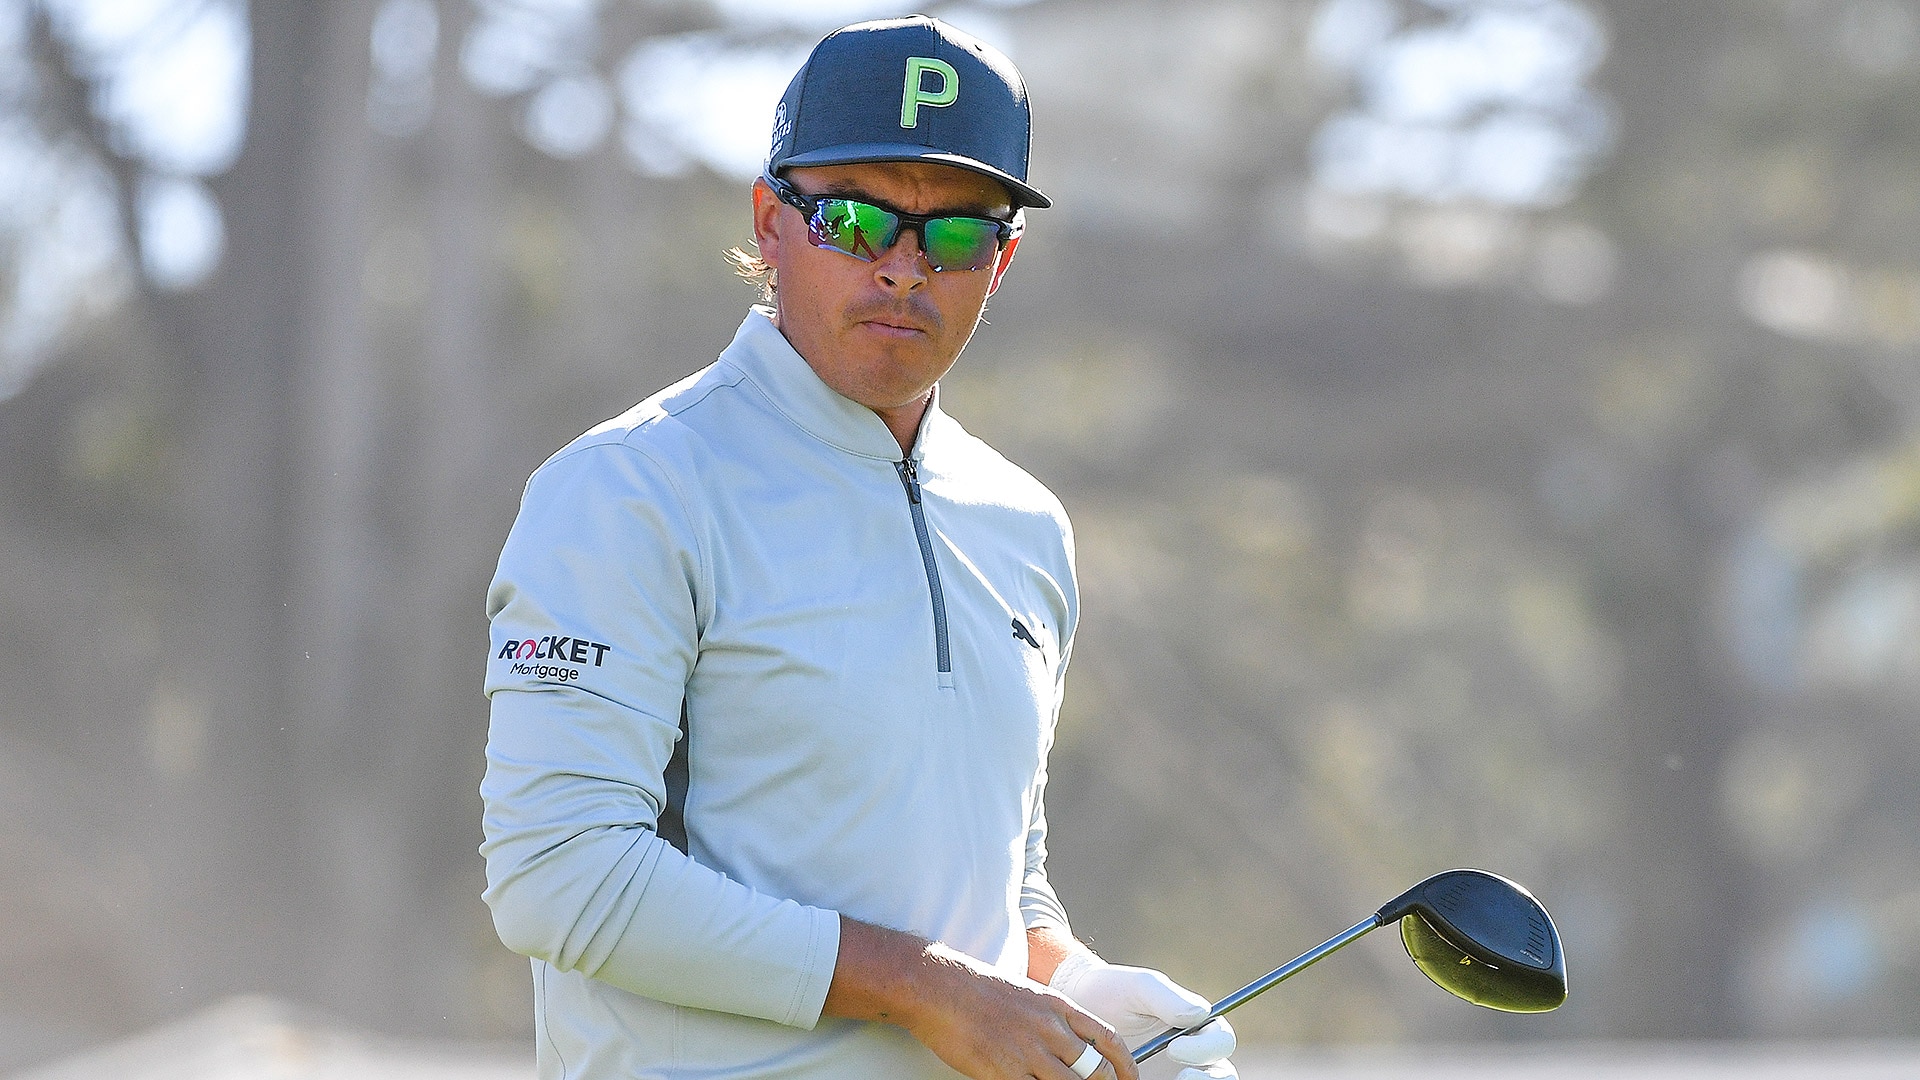 With new swing thought, a ‘more deliberate’ Rickie Fowler shoots 66